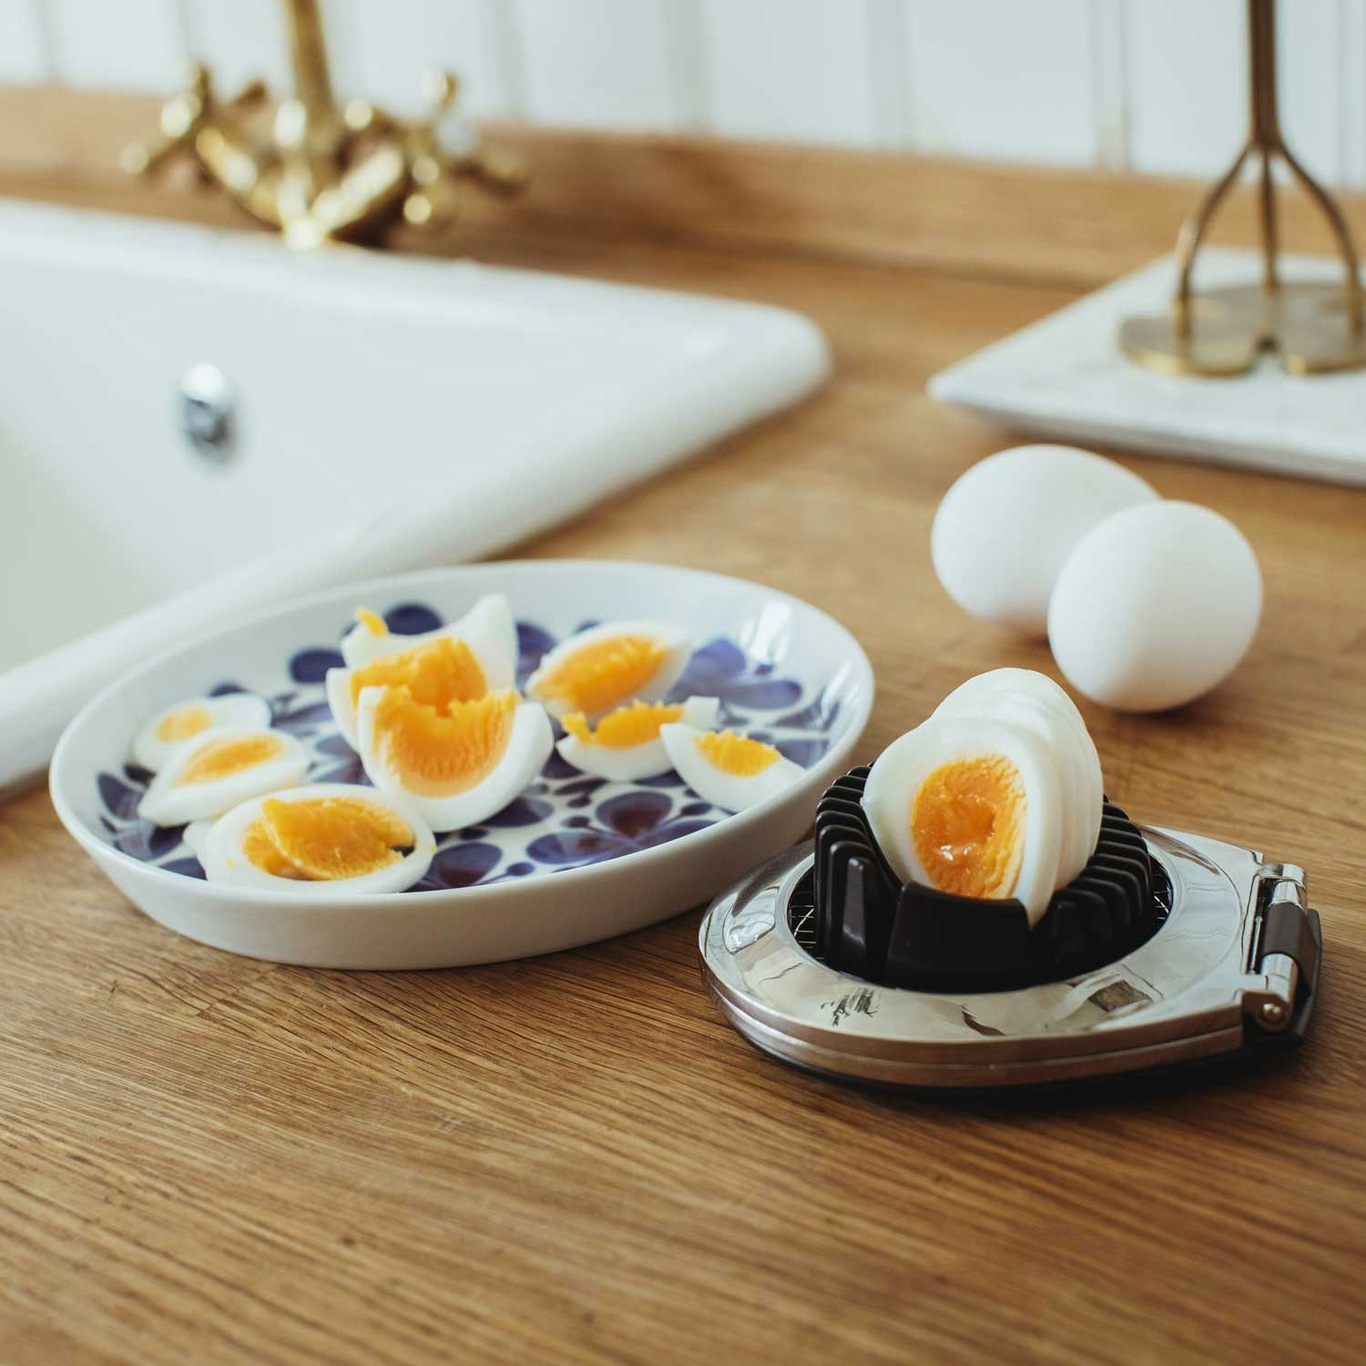 Everything you should know about the egg slicer